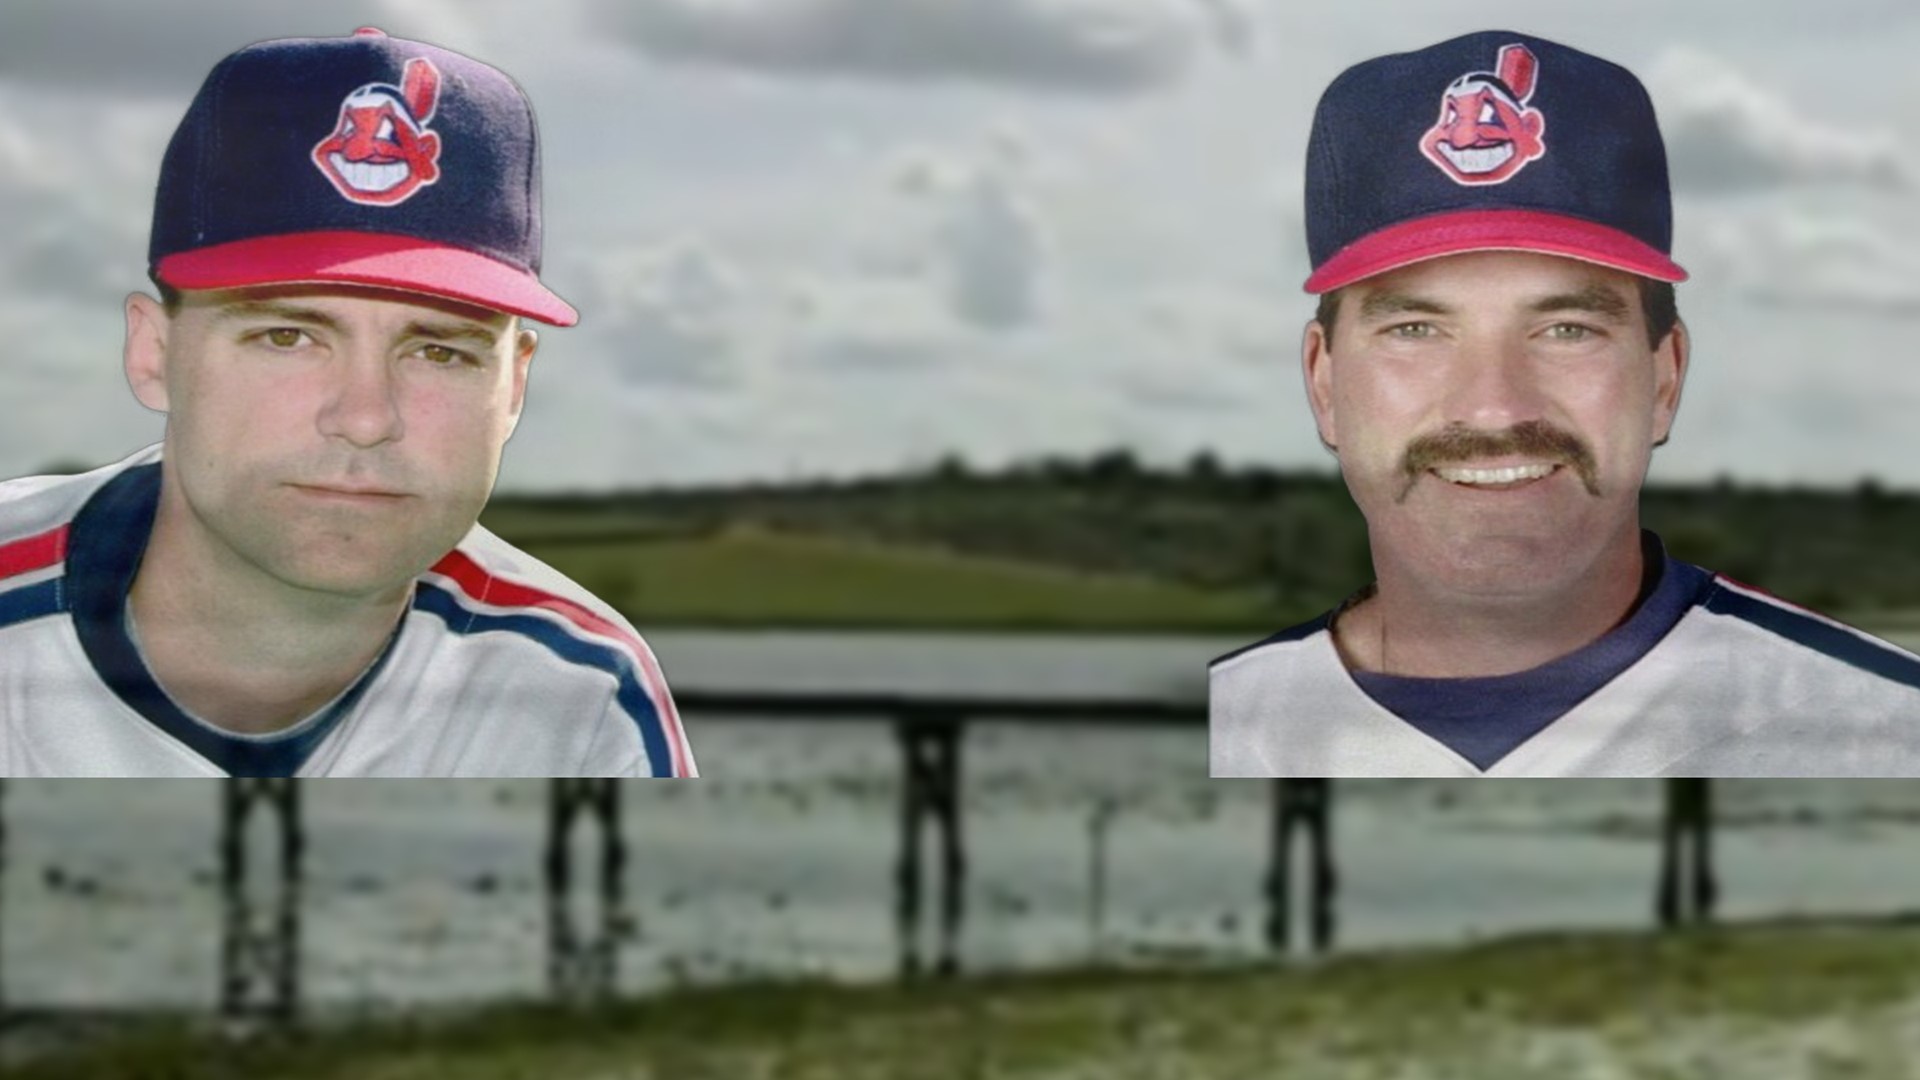 Both men were killed in a horrific boating accident on Florida's Little Lake Nellie. Their loss reverberated throughout the team, the city, and all of baseball.